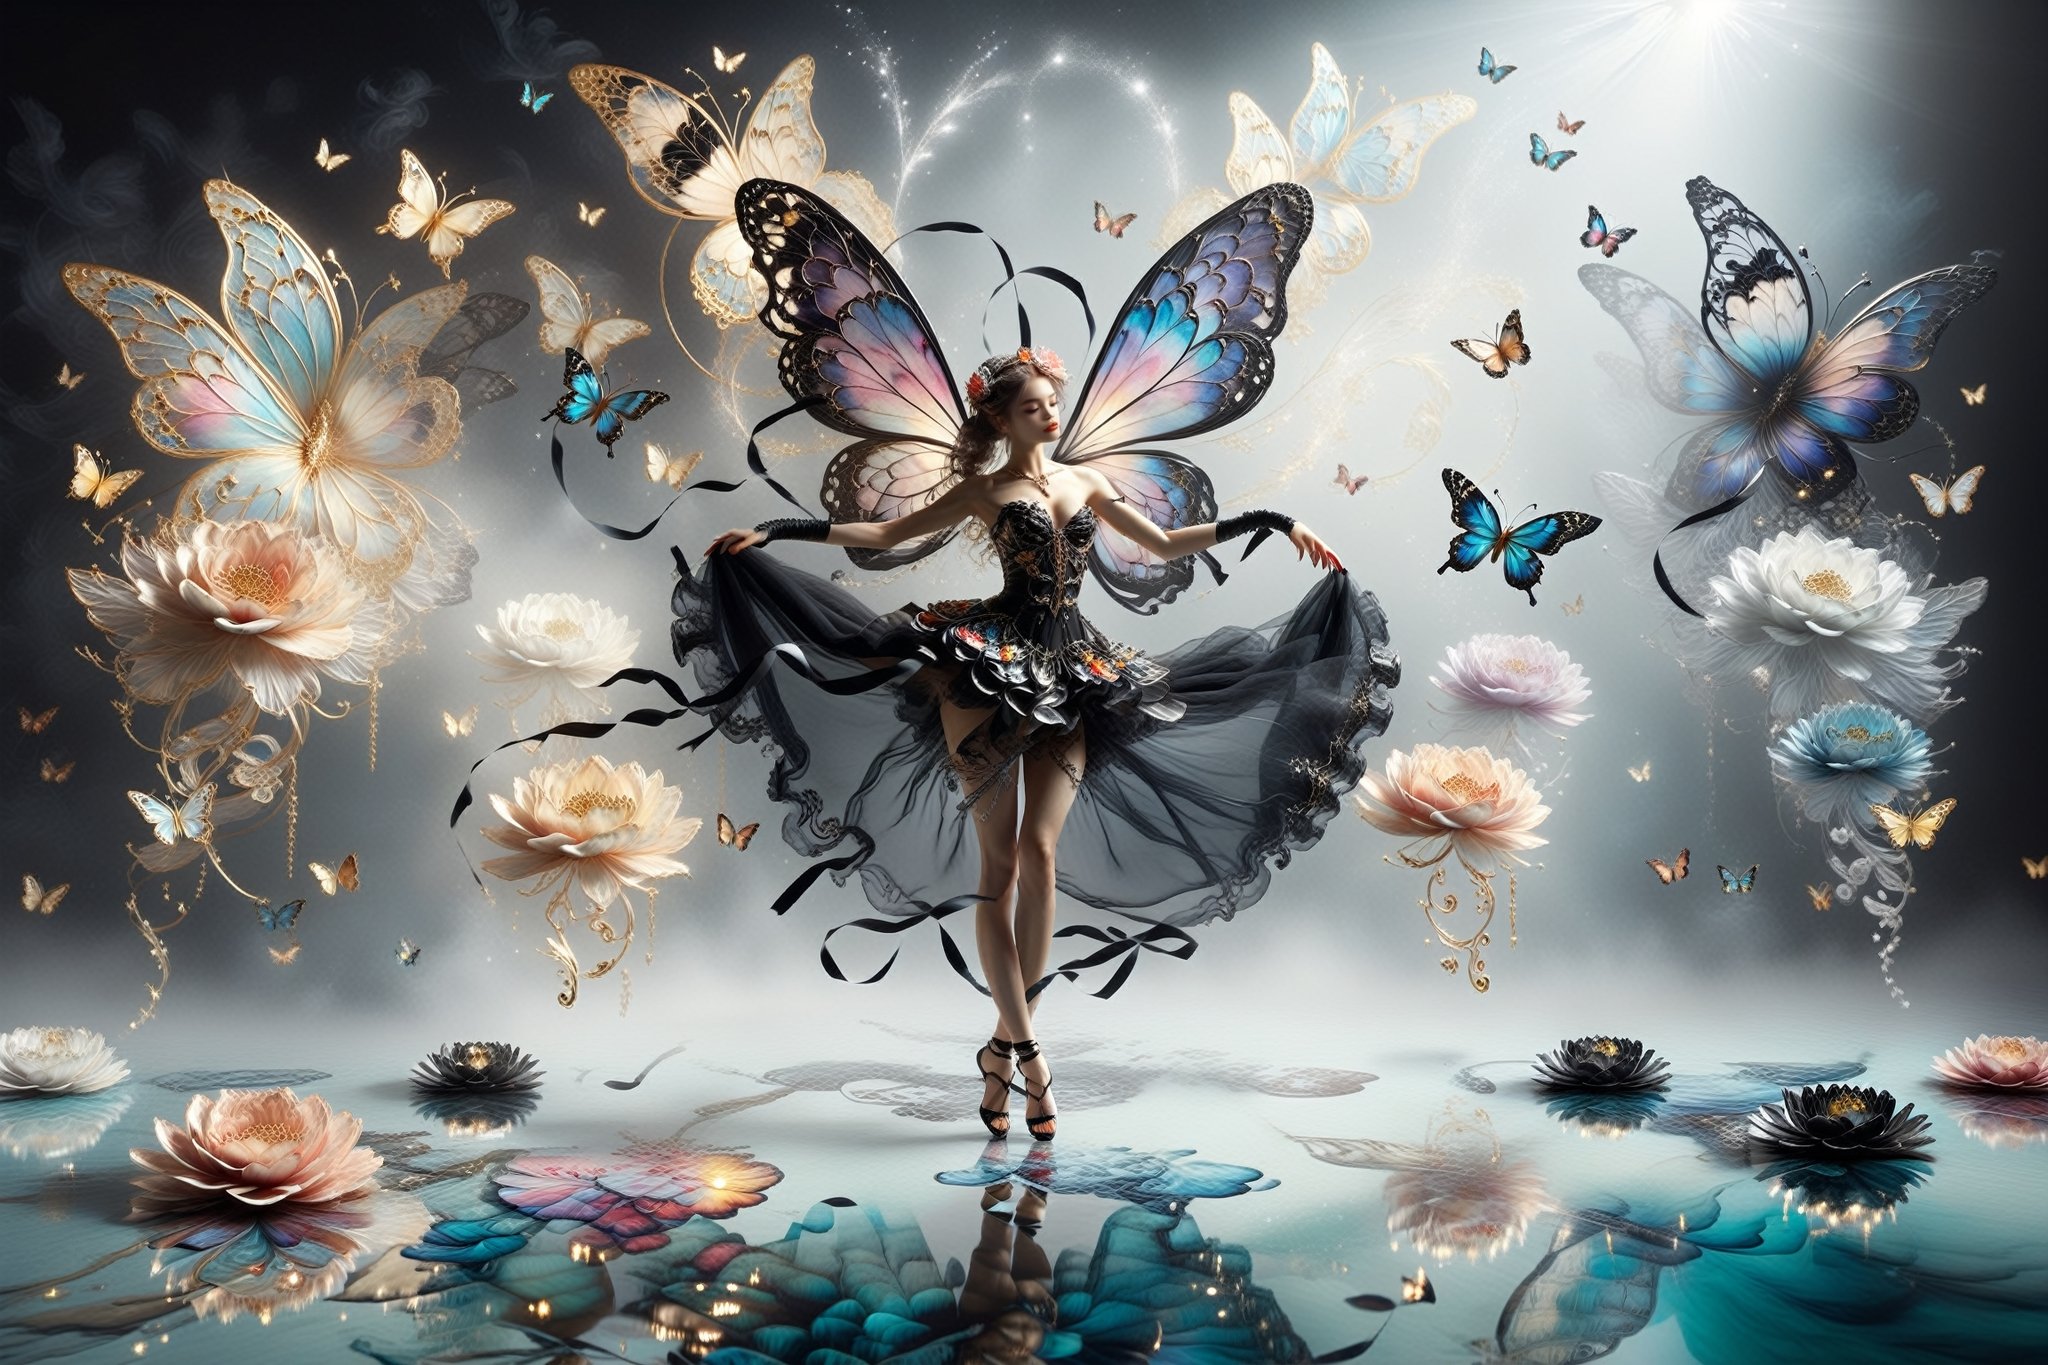  solo fairy dancing, with very butterfly wings, long black complex wavy lolita dress , long legs, two-legs, two-hands , 

a ring of flower as background , dark background , 
water on floor and reflection of the image 
masterpieces , 16K , raw photo , feather , flower rings , complex background 